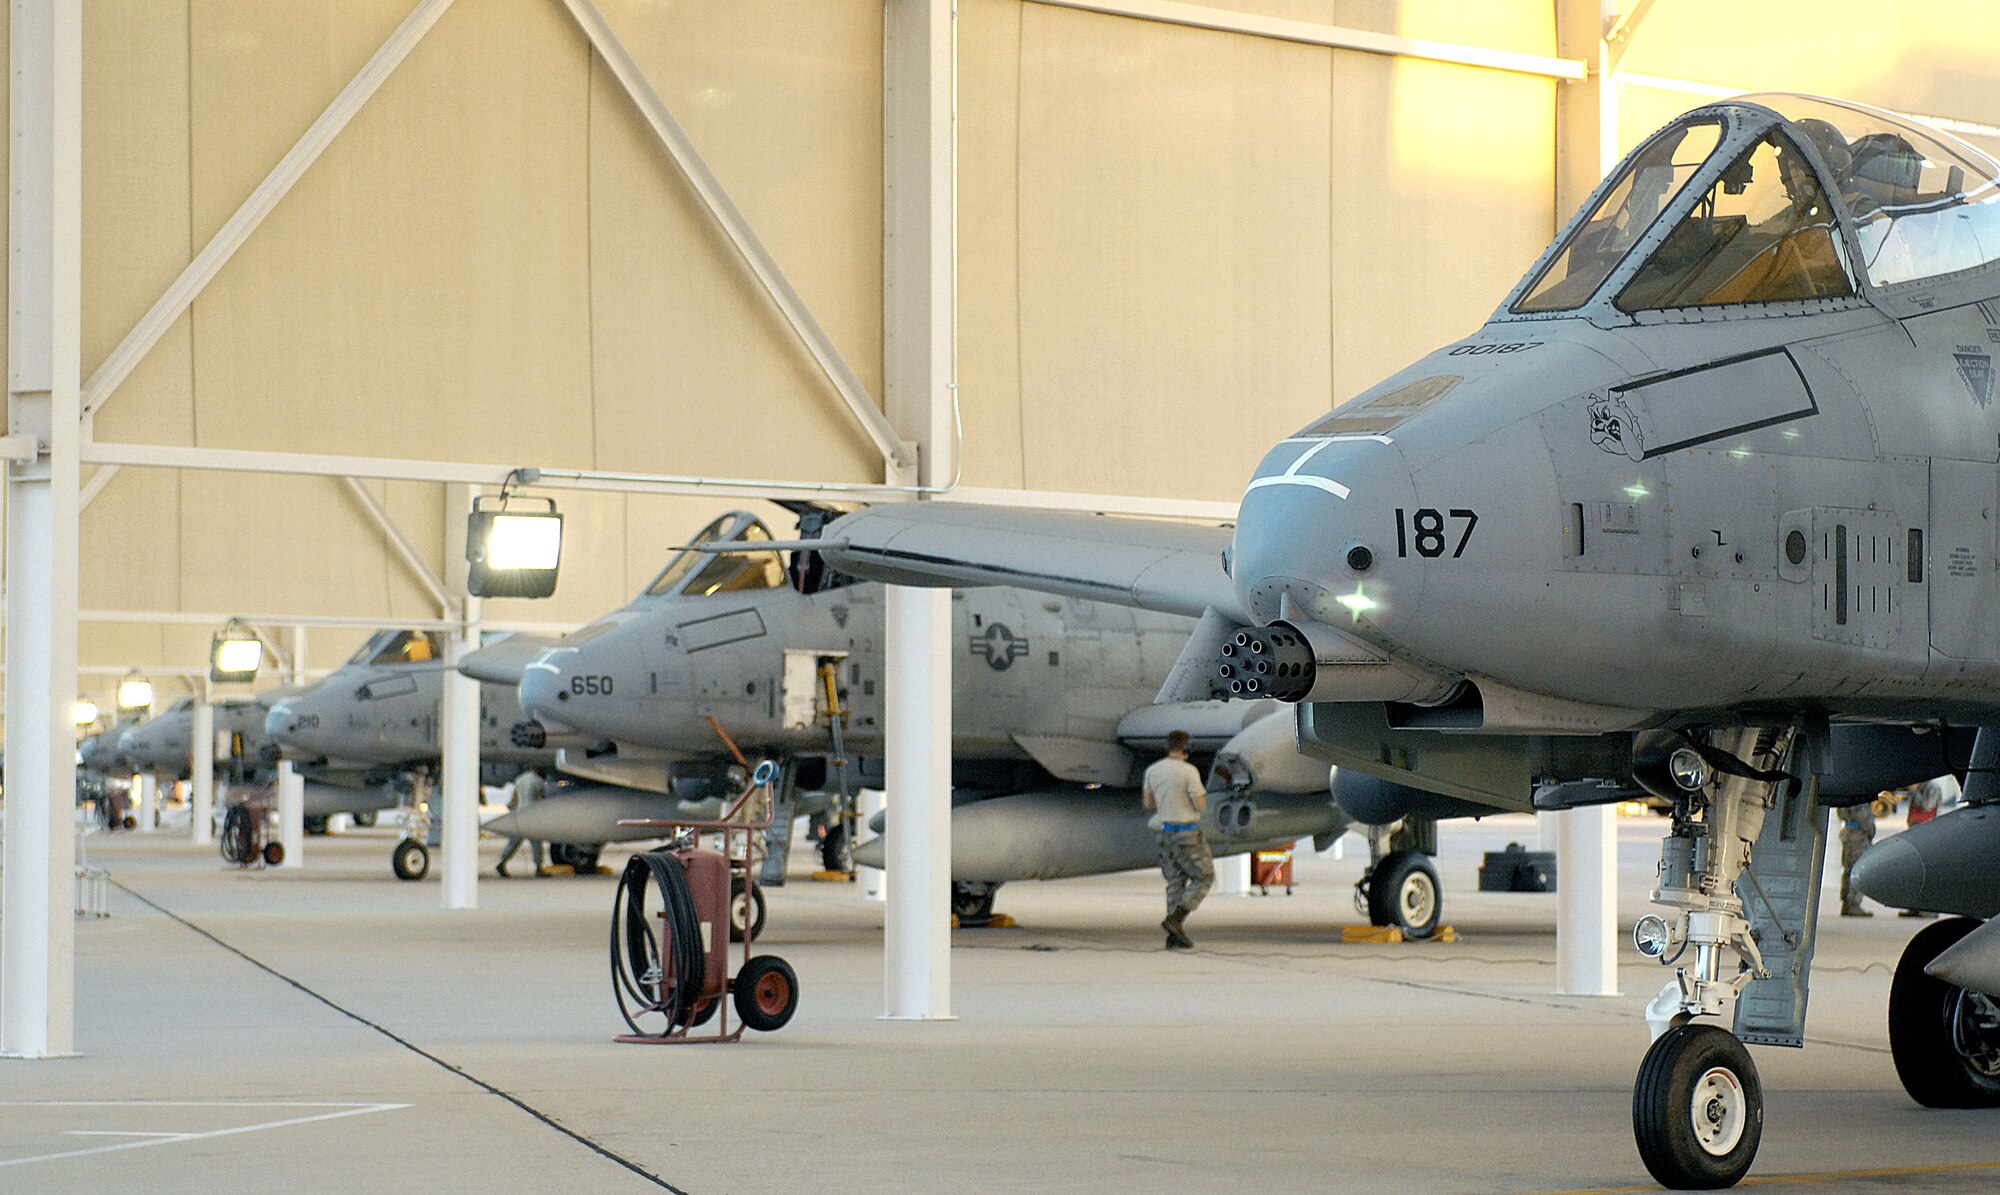 U. S. Air Force A-10 Thunderbolt II aircraft sit beneath sunshades on the flightline as they are checked over before takeoff at Davis-Monthan Air Force Base, Ariz., Sept. 26, 2012. More than 20 aircraft and 400 personnel were deployed to the 455th Air Expeditionary Wing, Bagram Airfield, Afghanistan, in support of Operation Enduring Freedom. (U. S. Air Force photo by Airman 1st Class Saphfire Cook)